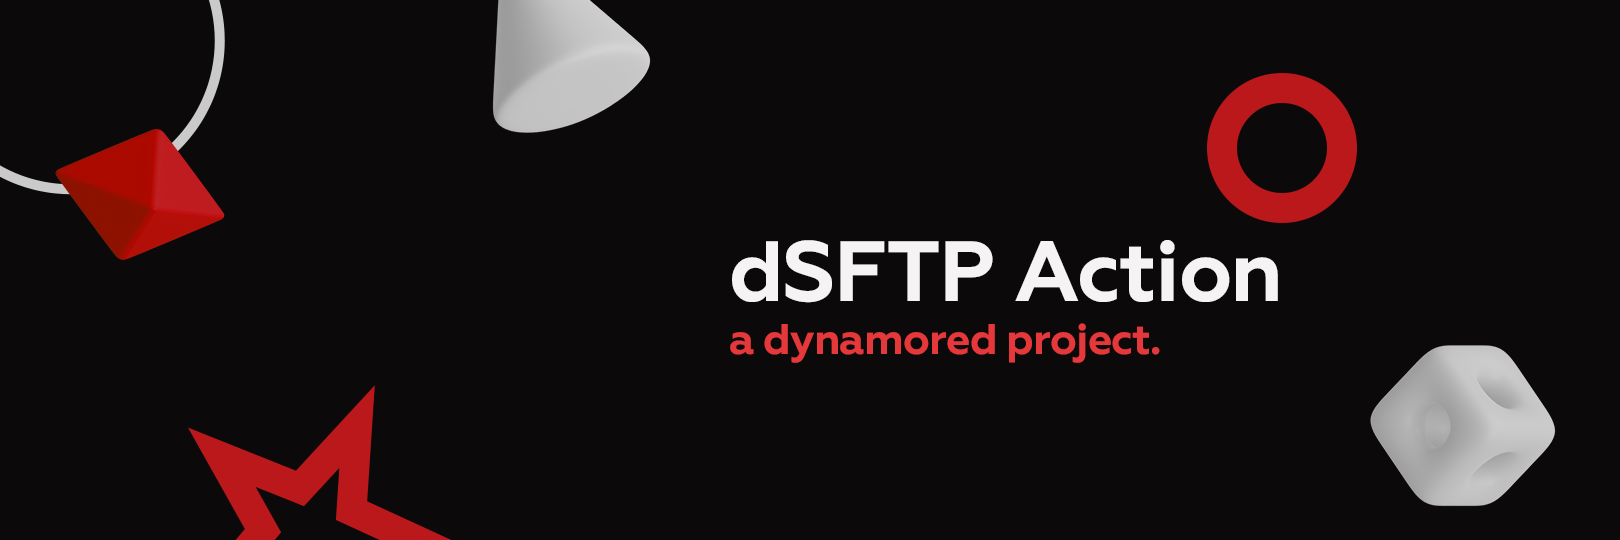 dSFTPAction